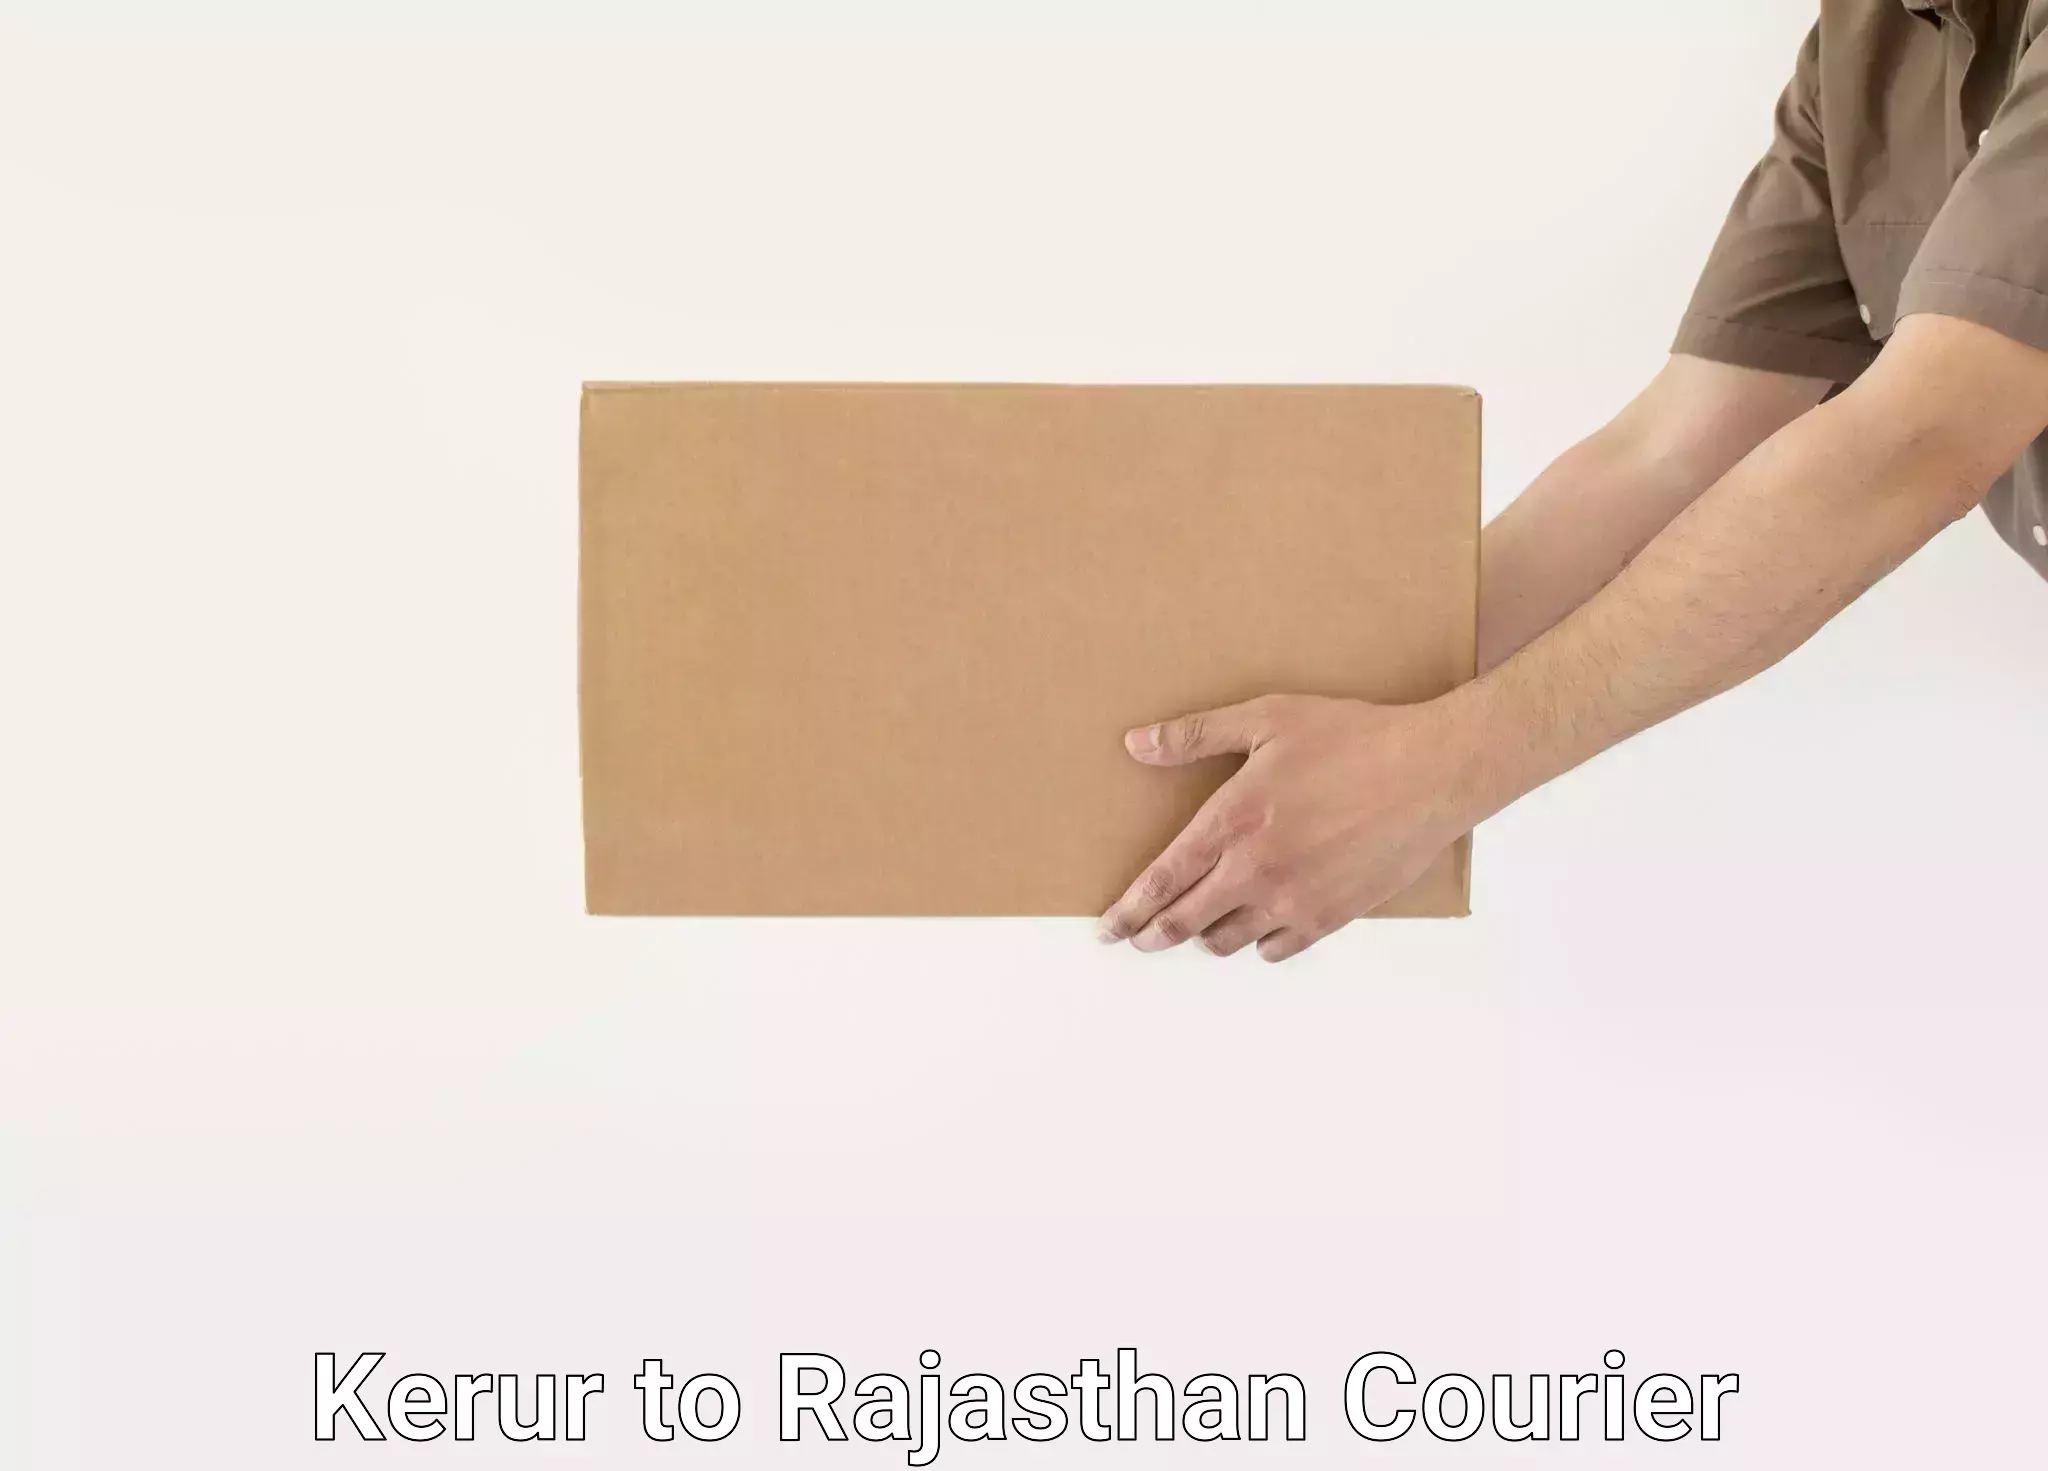 Home relocation experts Kerur to Suratgarh